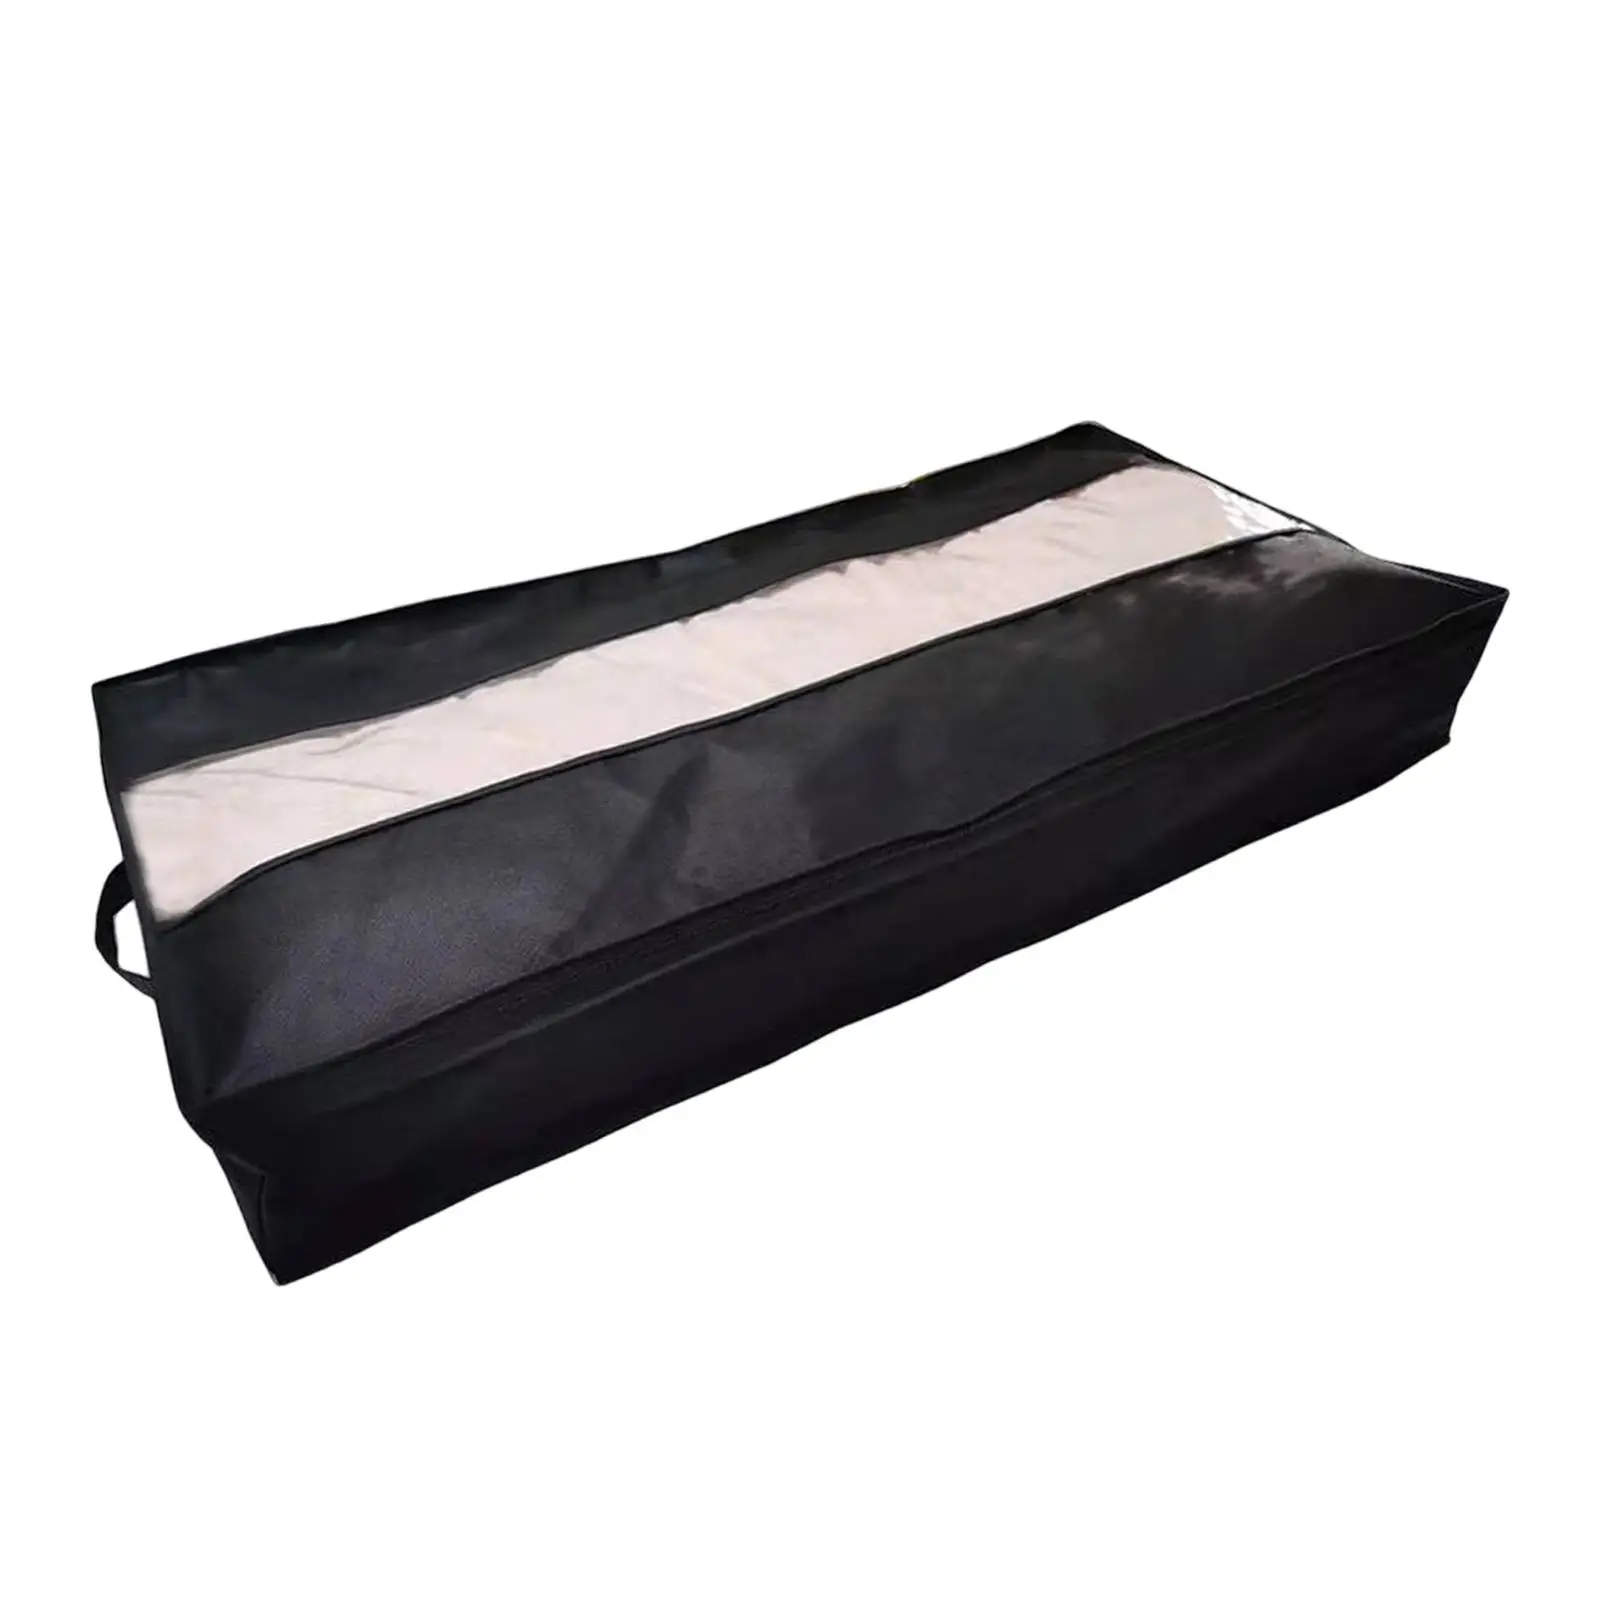 Quilt Storage Bag Easy Carrying and Moving Underbed Storage Containers Thick Fabric for Clothing Bedroom Linen Closet Comforters